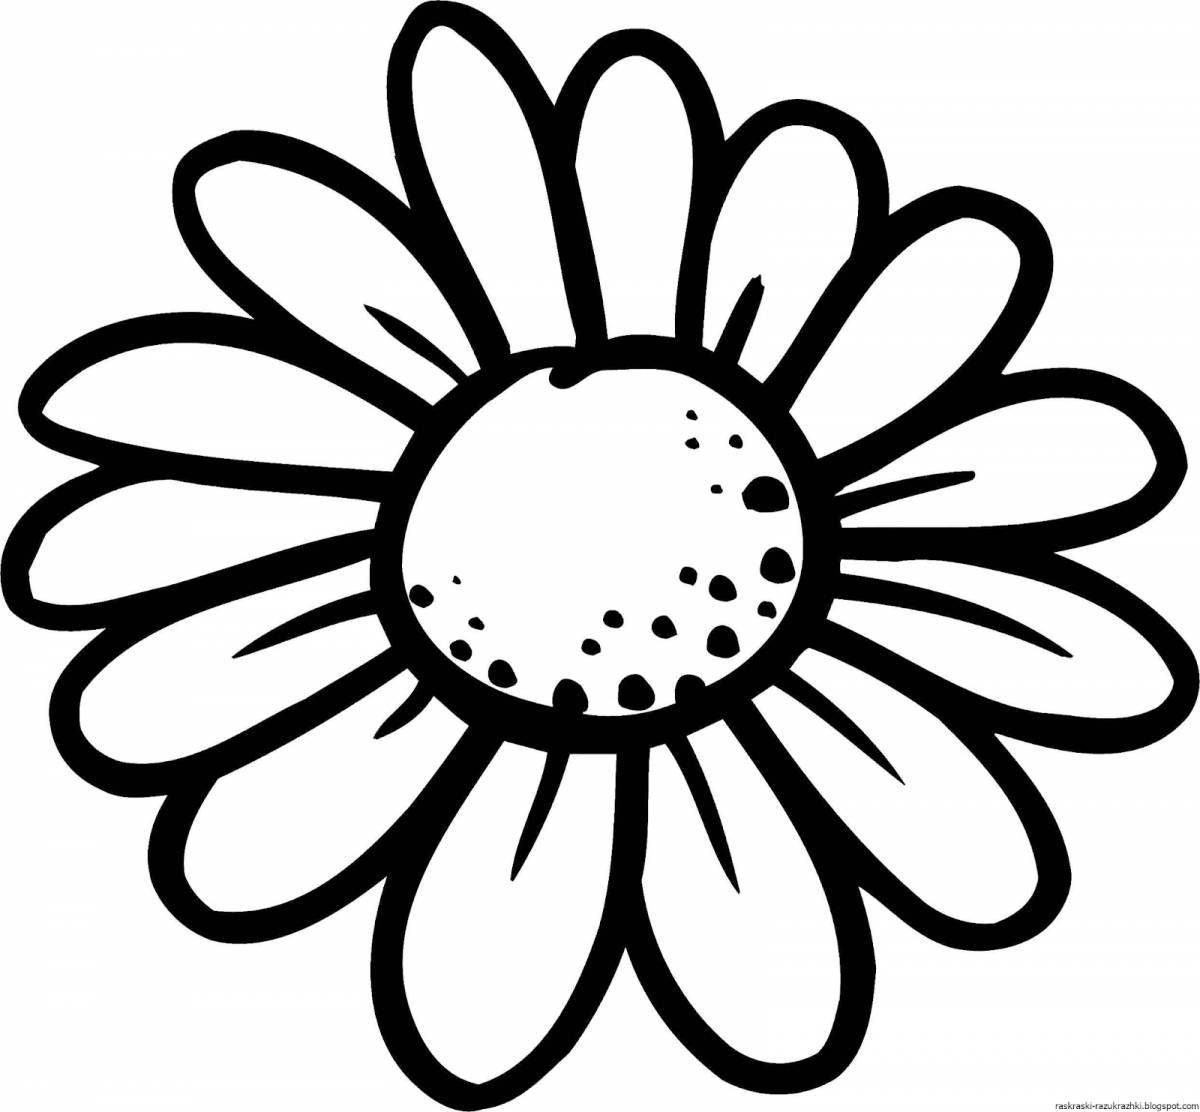 Calm daisy coloring page